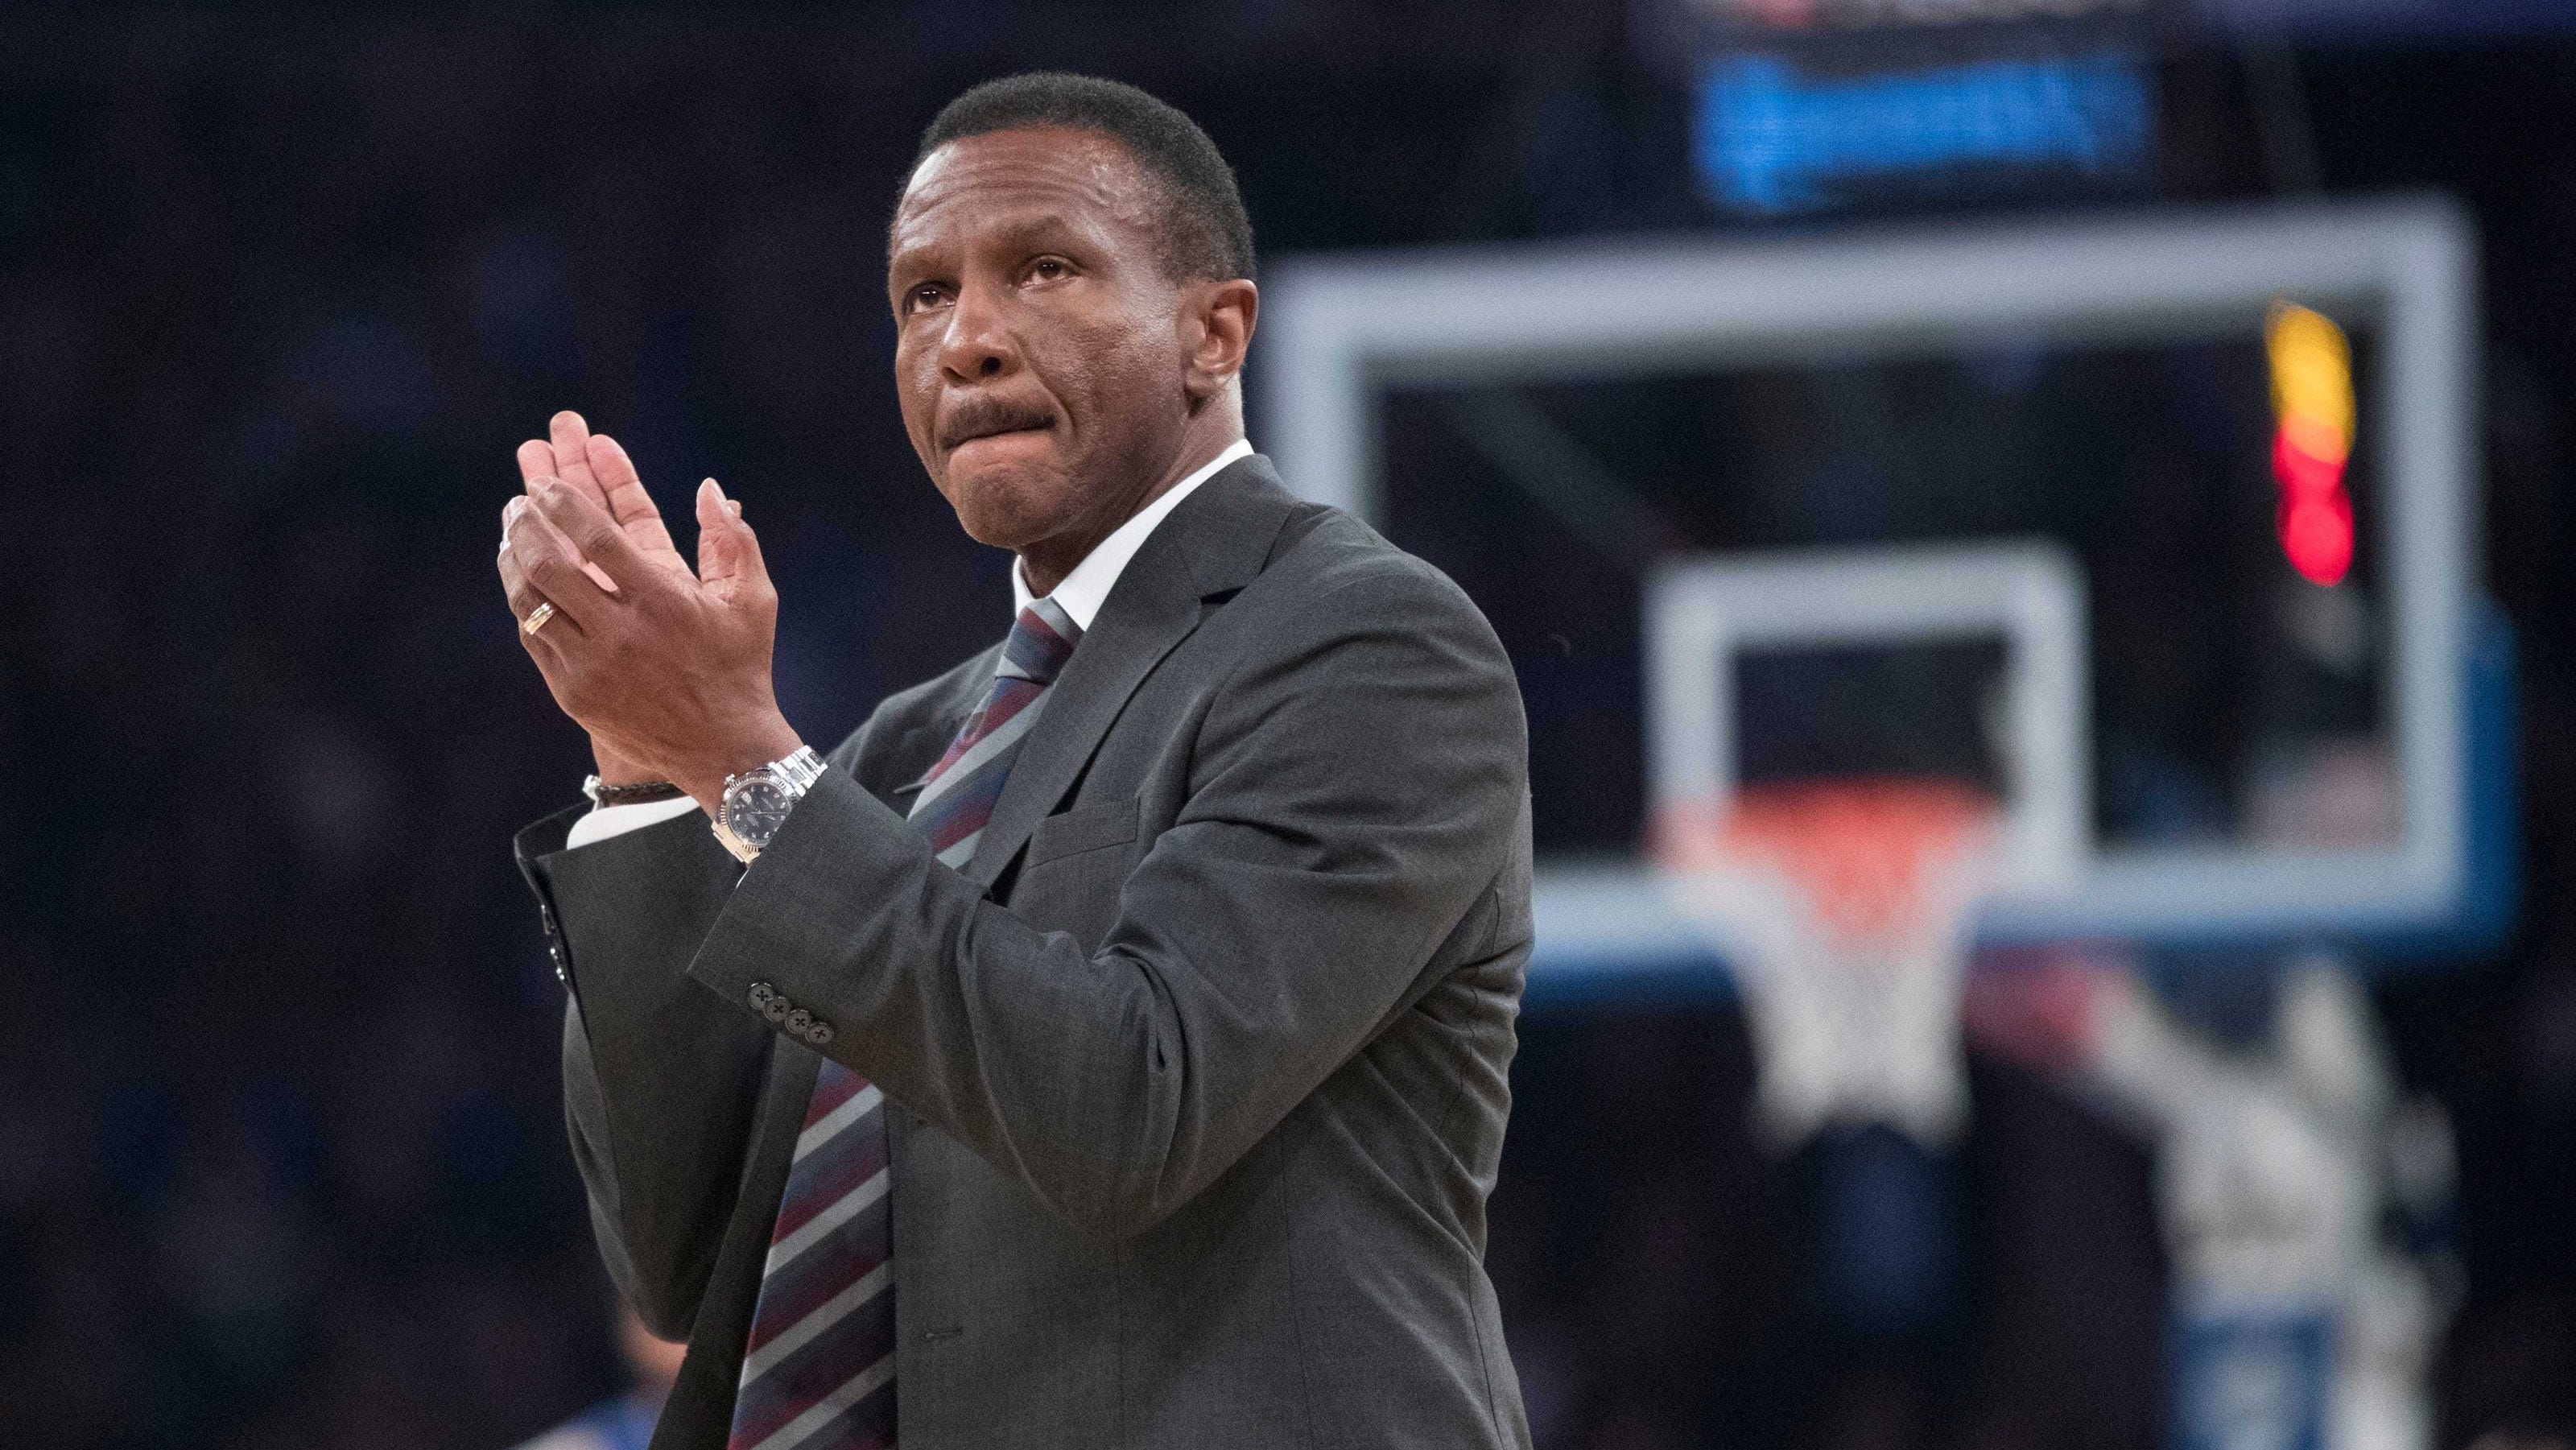 Detroit Pistons' coach Dwane Casey finally getting his wish to compete